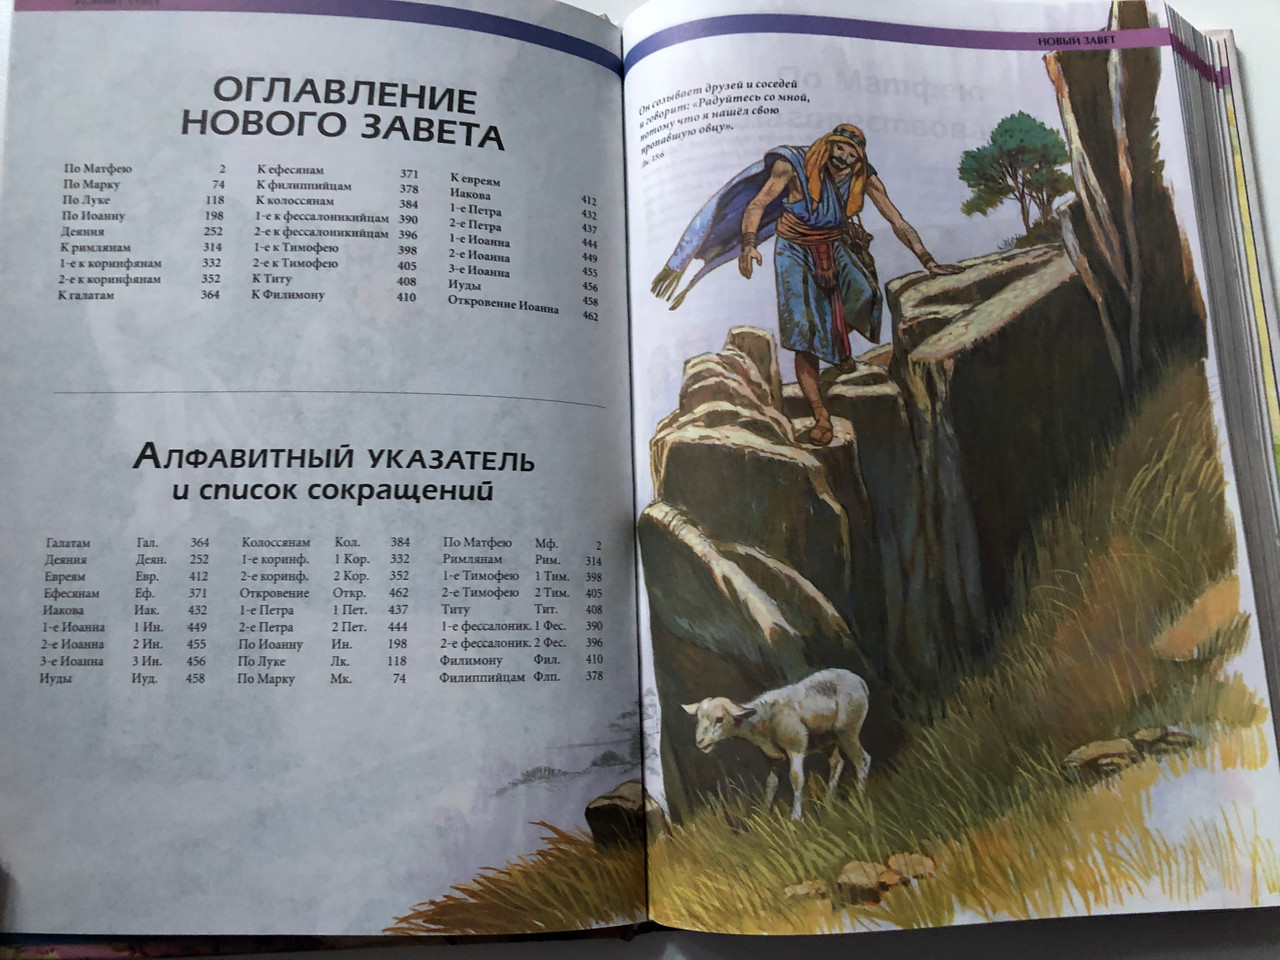 https://cdn10.bigcommerce.com/s-62bdpkt7pb/products/51203/images/260733/Russian_edition_of_The_Illustrated_New_Testament_5__66153.1670931831.1280.1280.JPG?c=2